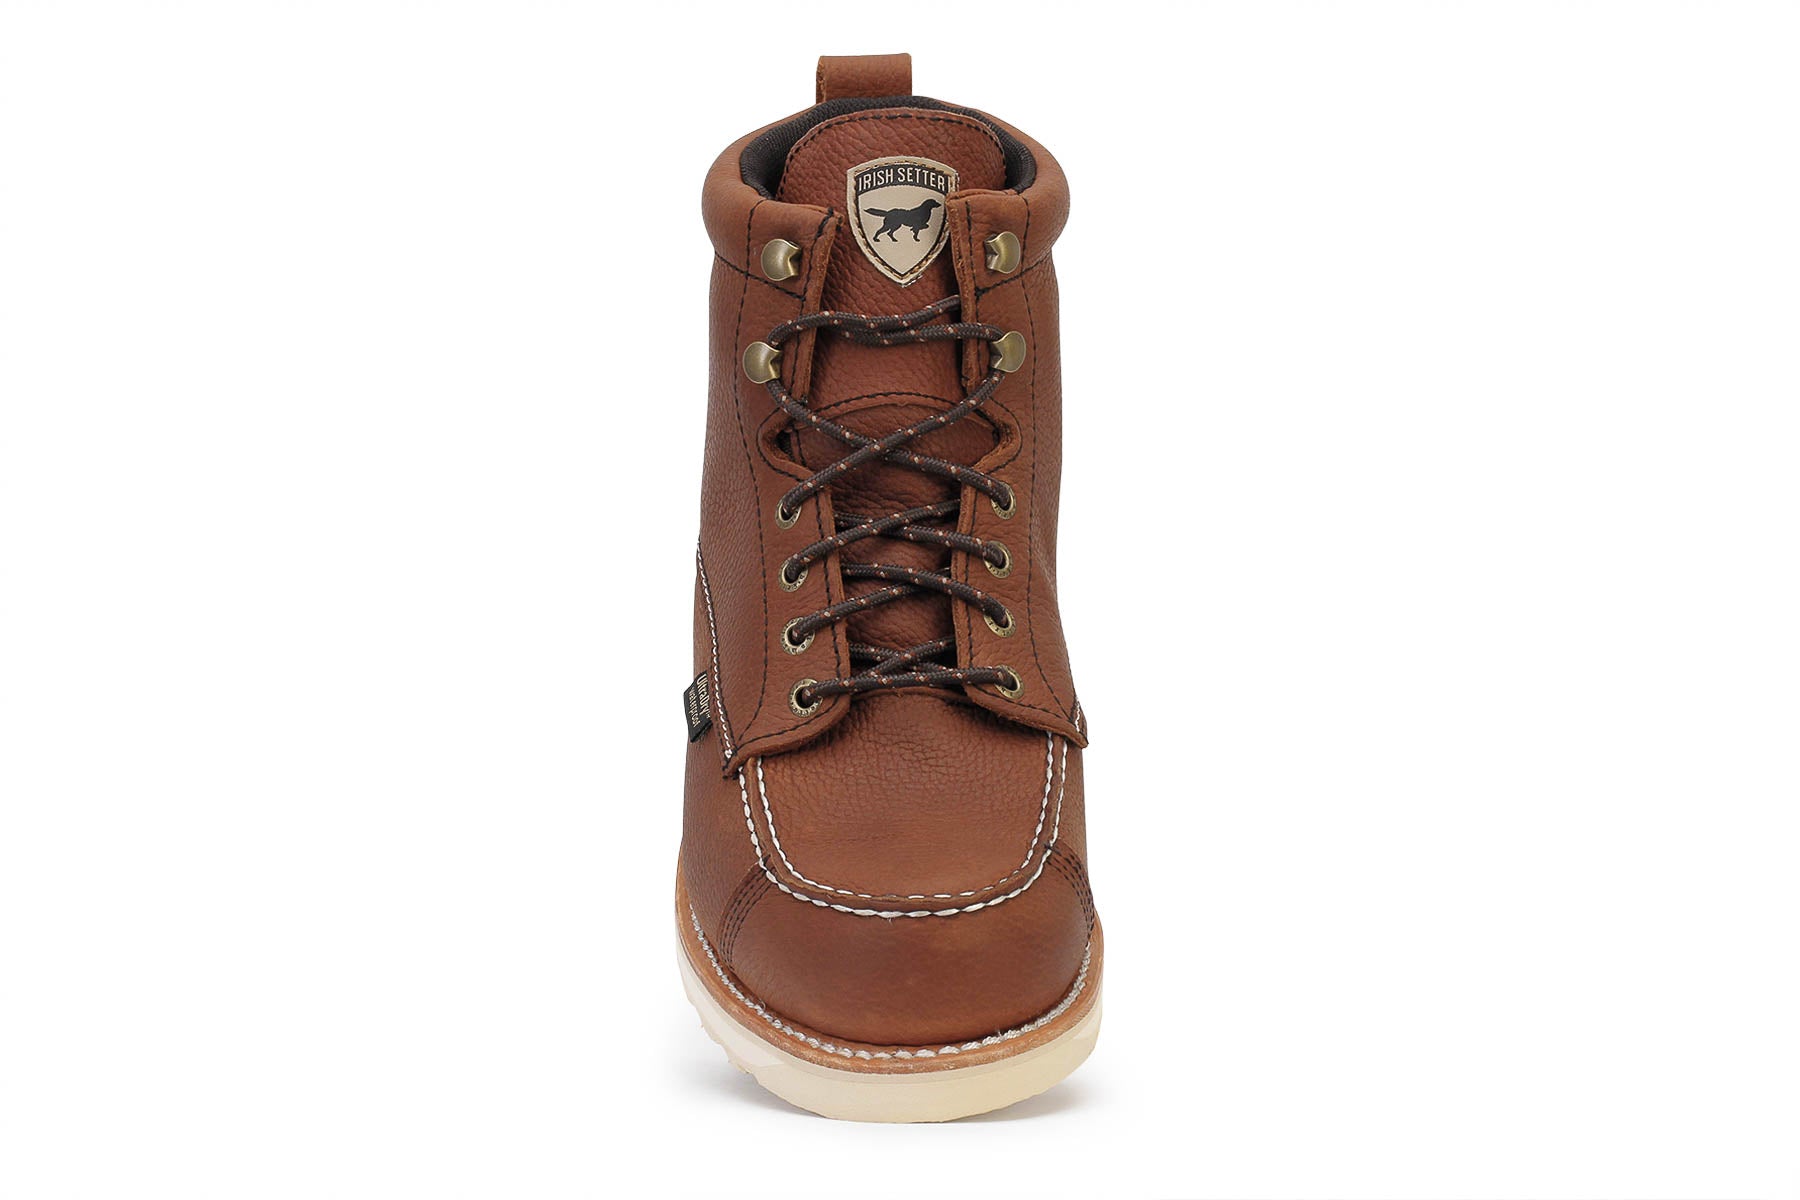 Irish Setter Boots by Red Wing Shoes 838 Wingshooter 7